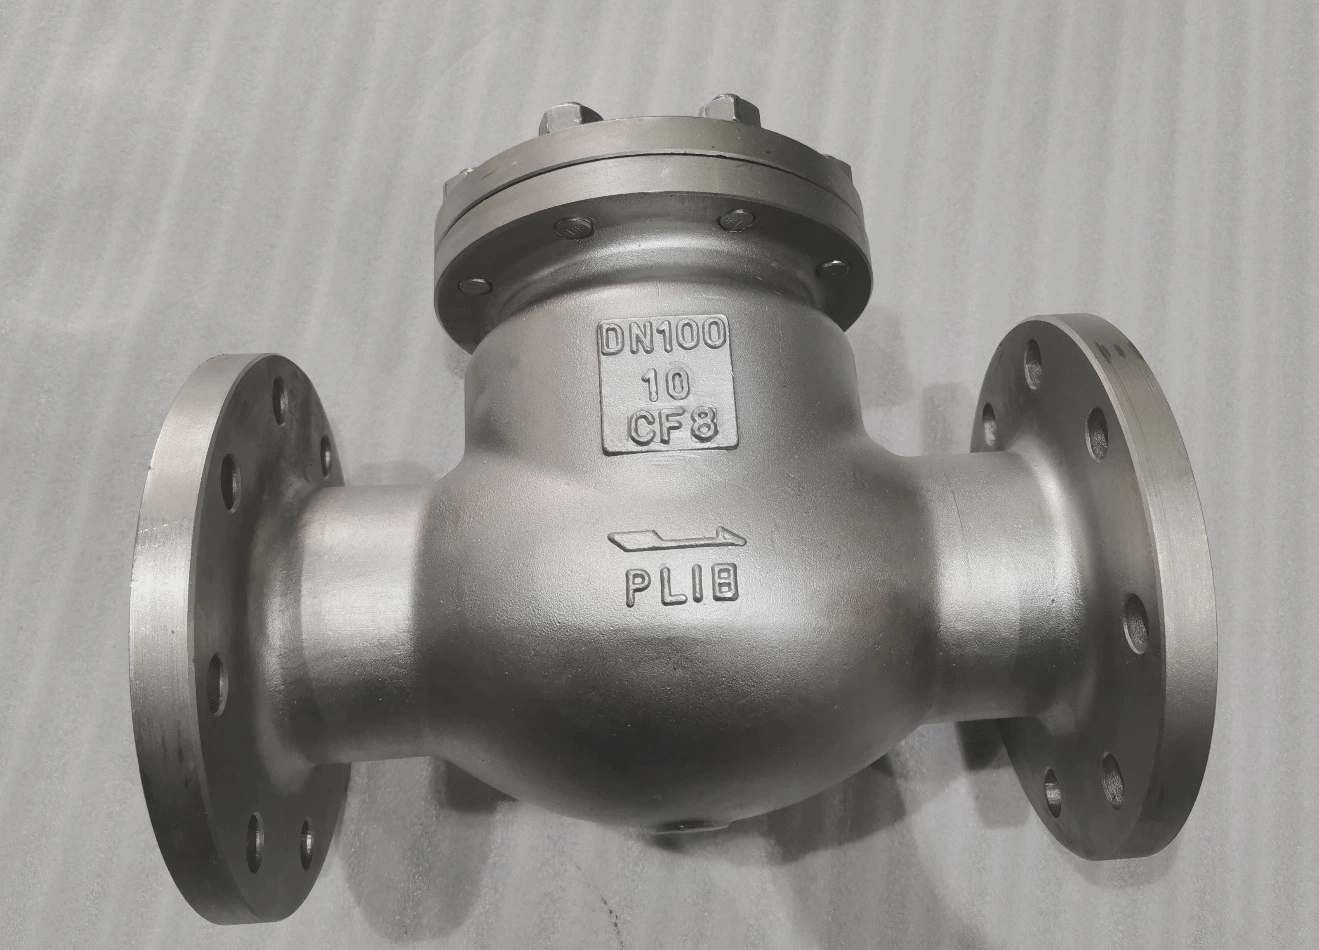 Cast Iron Brass Stainless Steel Flange Check Valve Butterfly Ball for Water Pipe Fitting Auto Machine